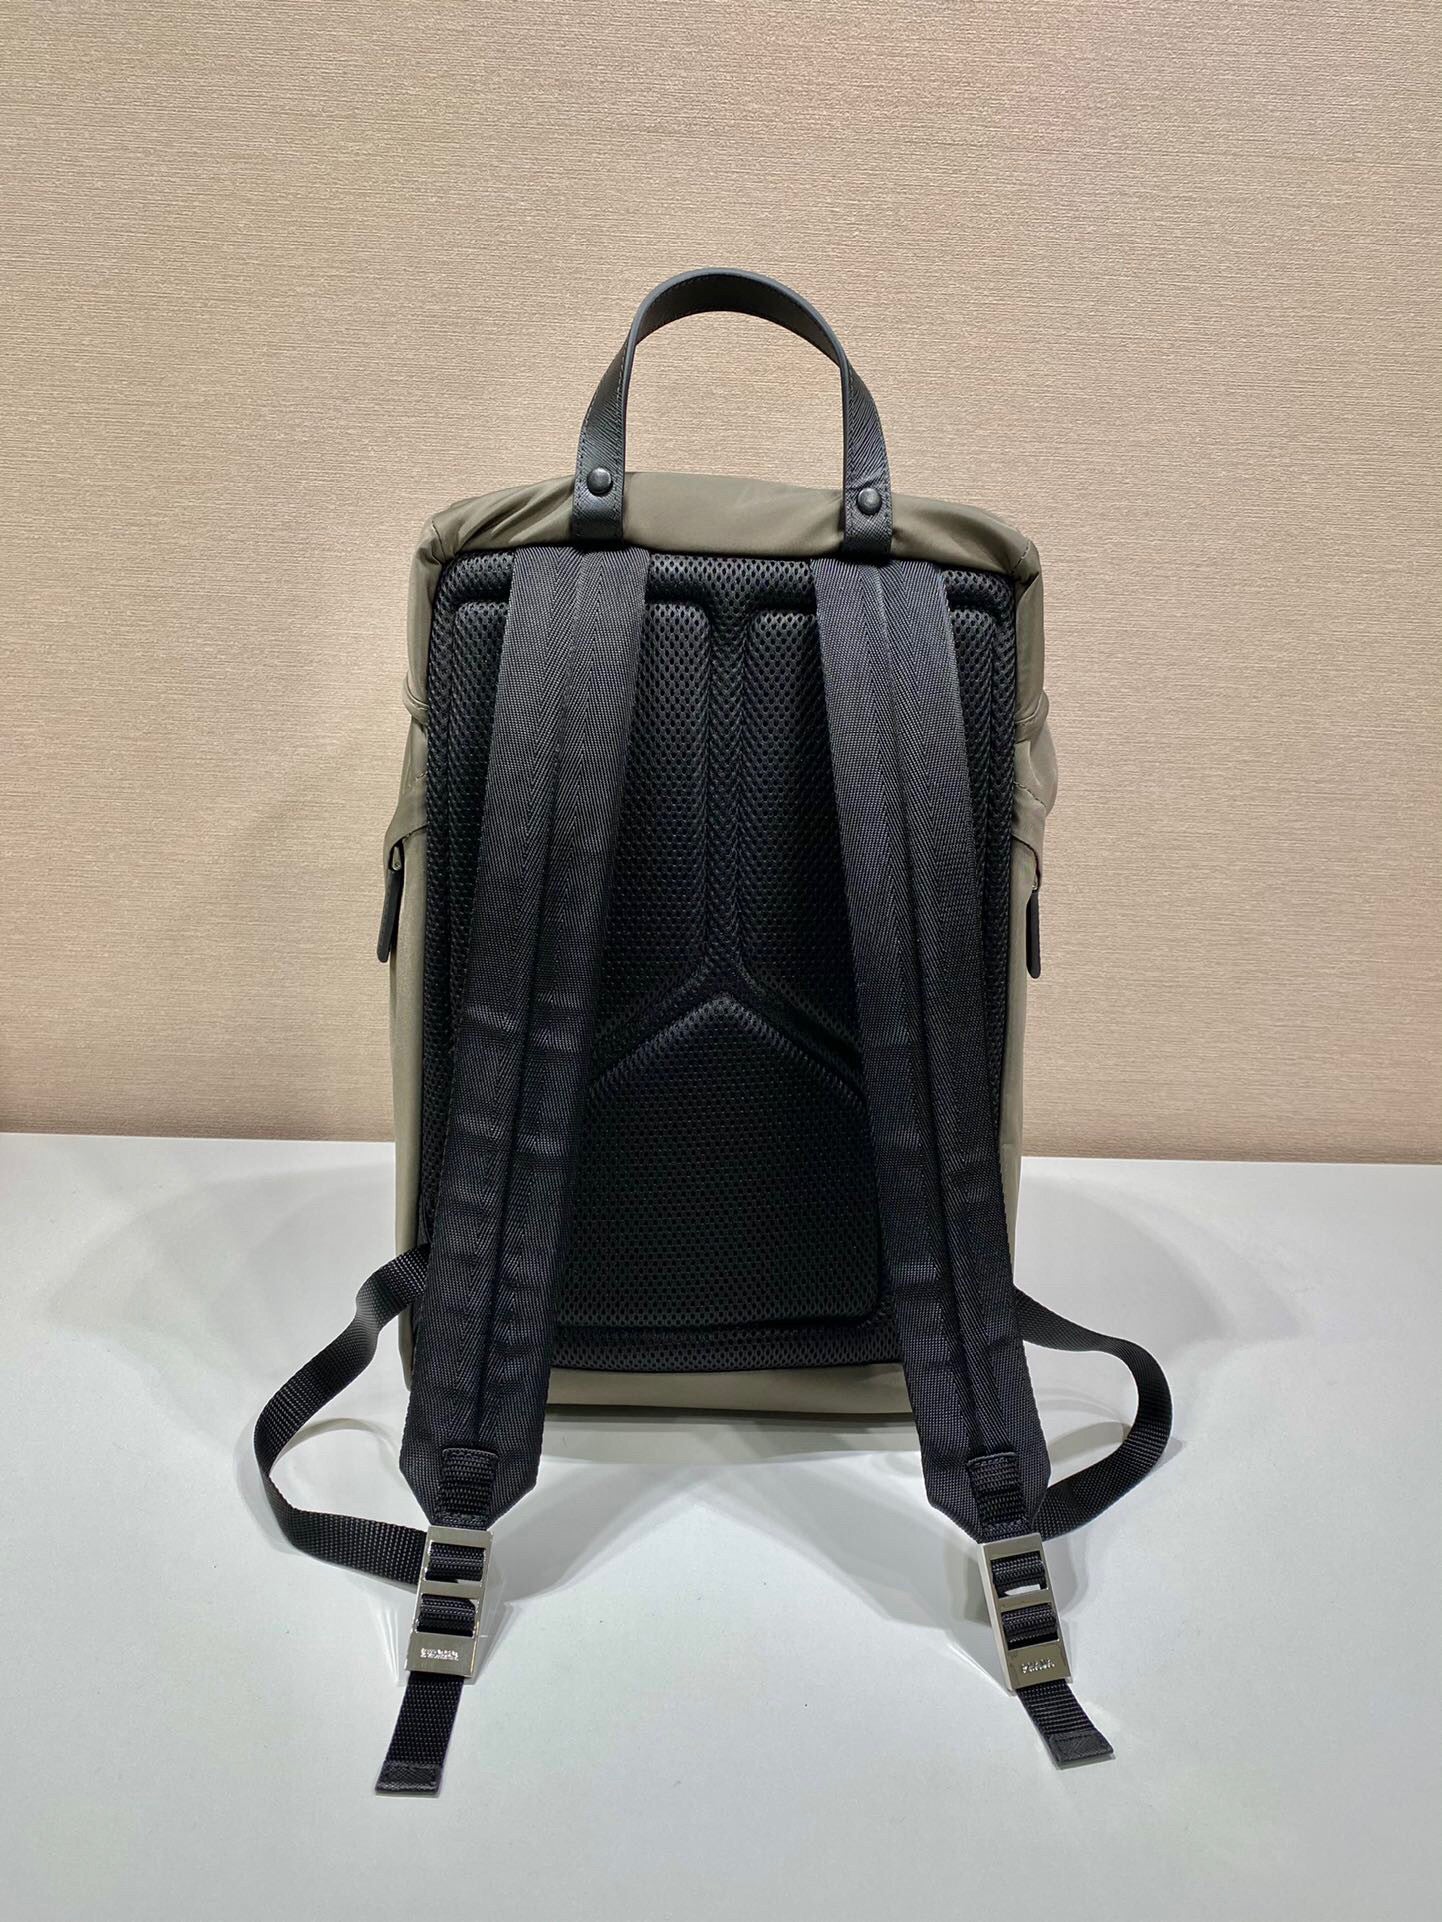 Prada Re-Nylon and Saffiano leather backpack